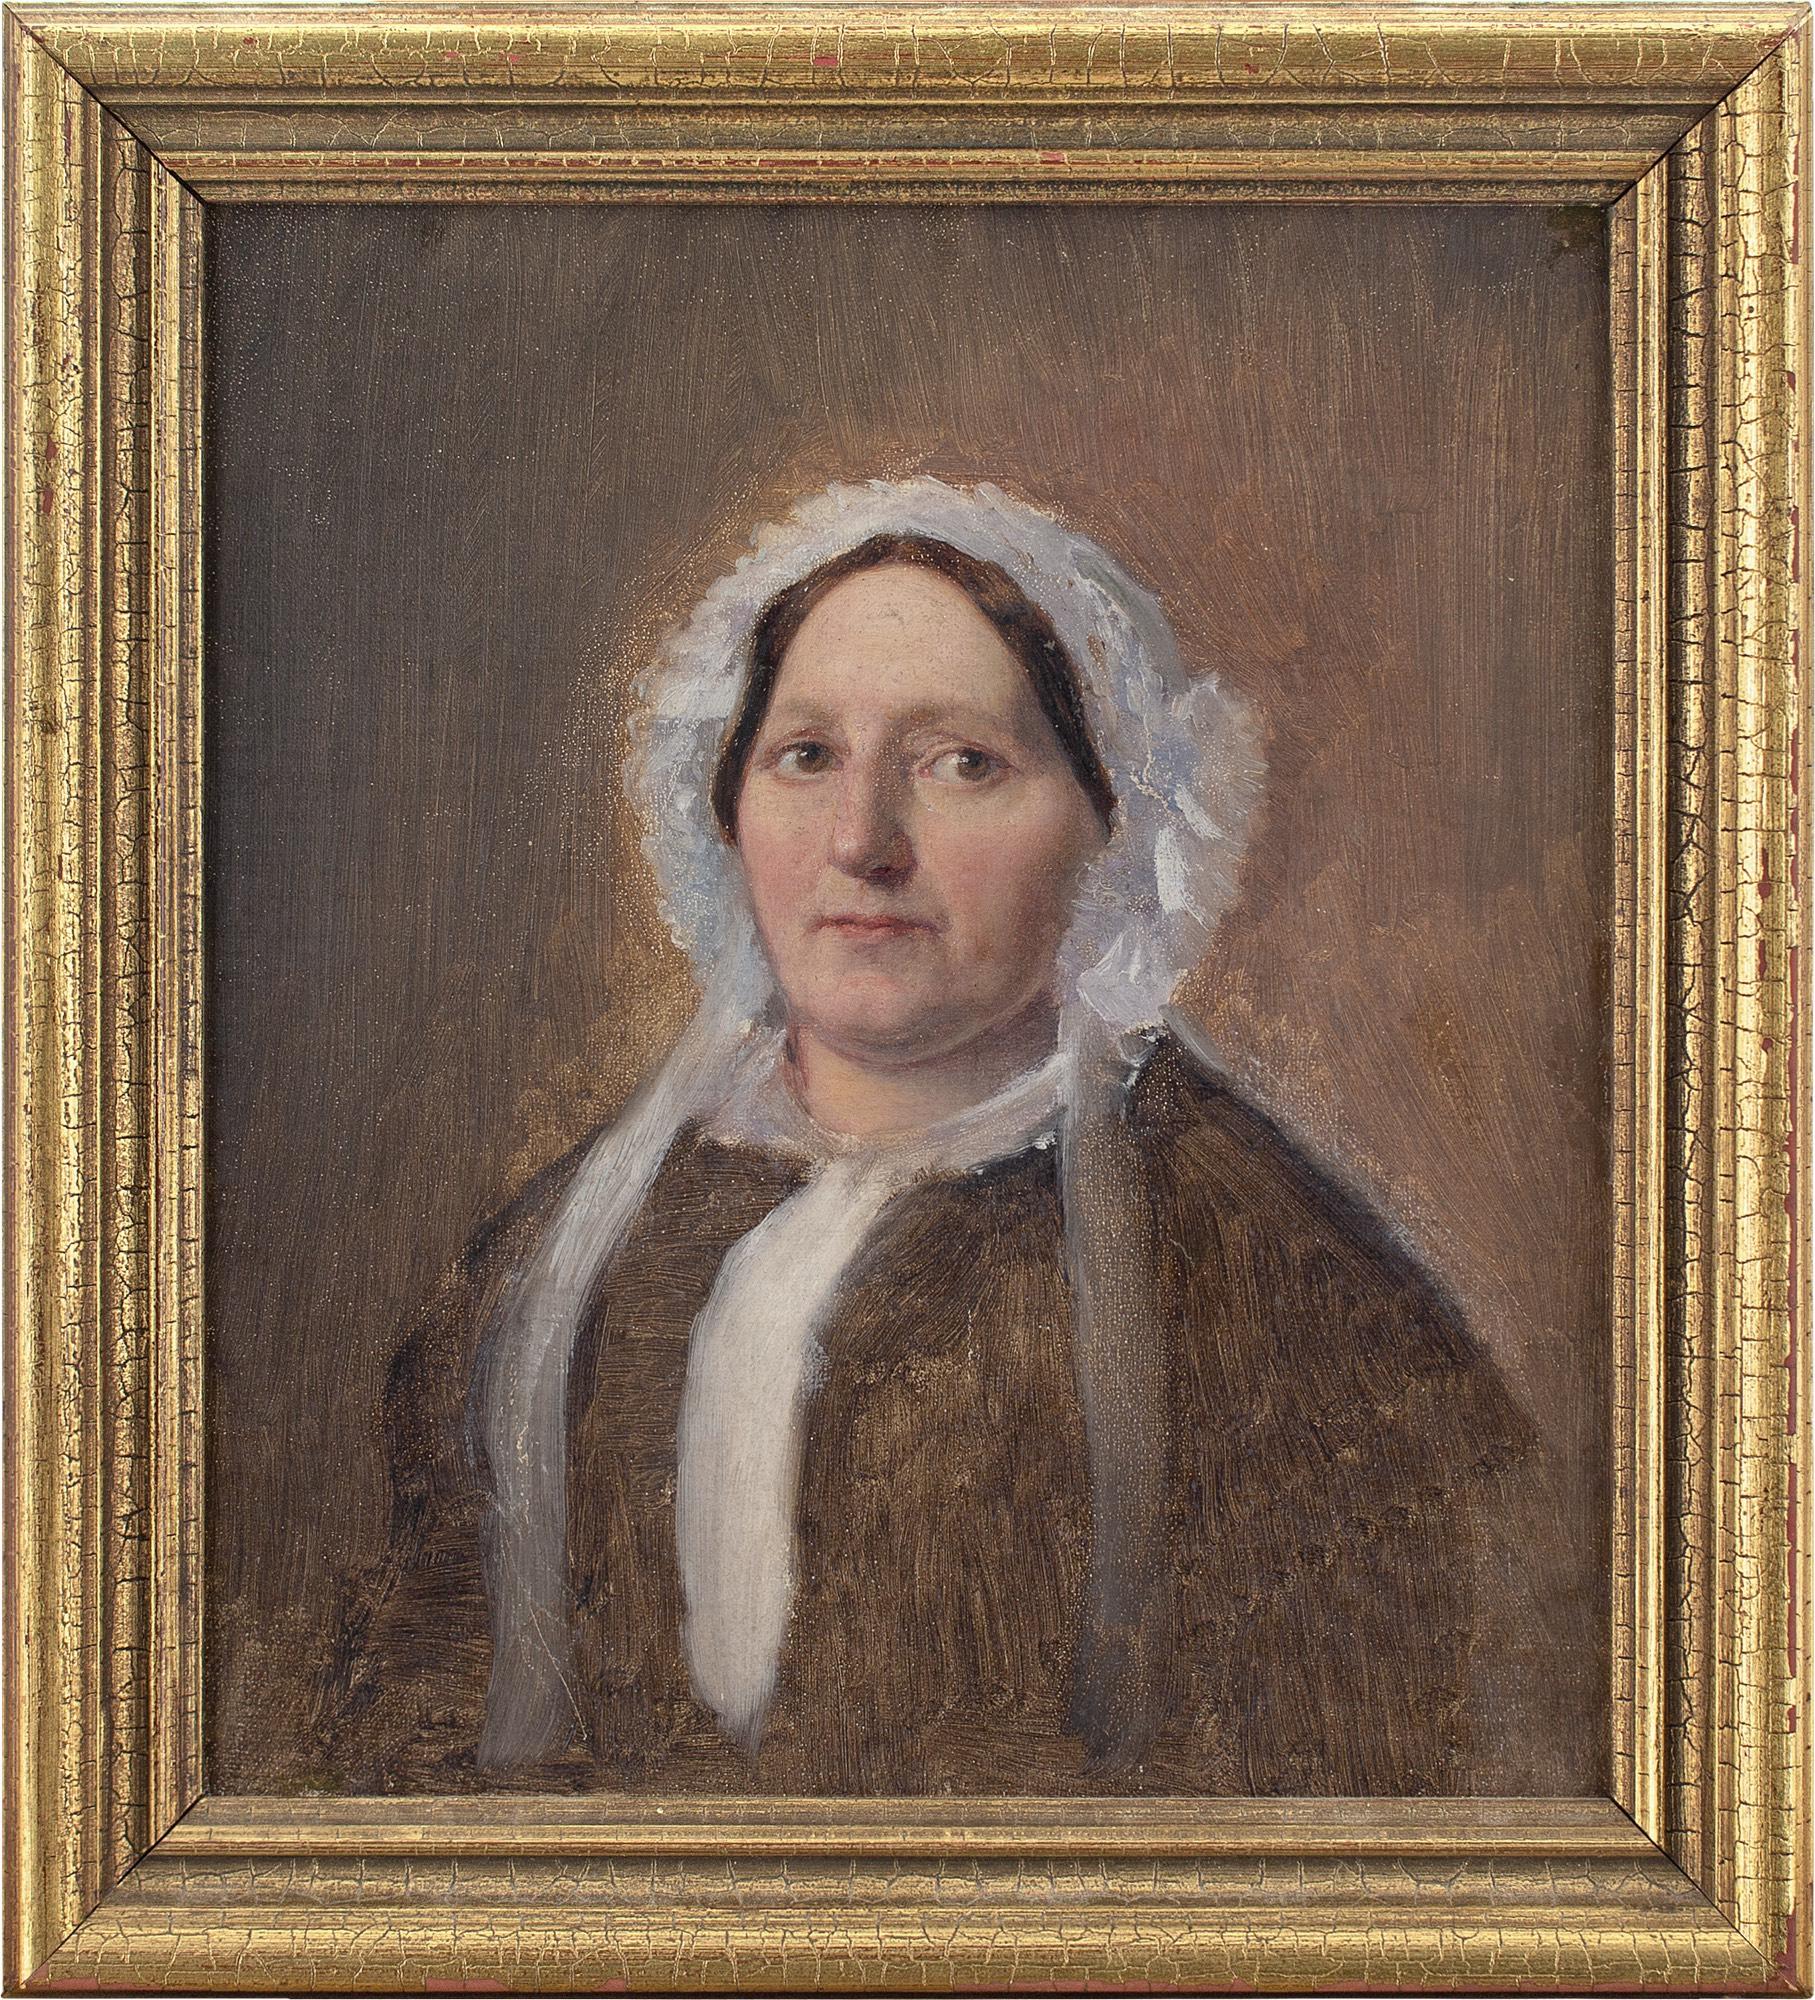 This early 19th-century oil painting by Danish artist Julius Friedländer (1810-1861) depicts his mother, Rebecca Friedländer (1777-1858).

Friedländer was predominantly a genre painter but also produced portraits of the rising middle classes.